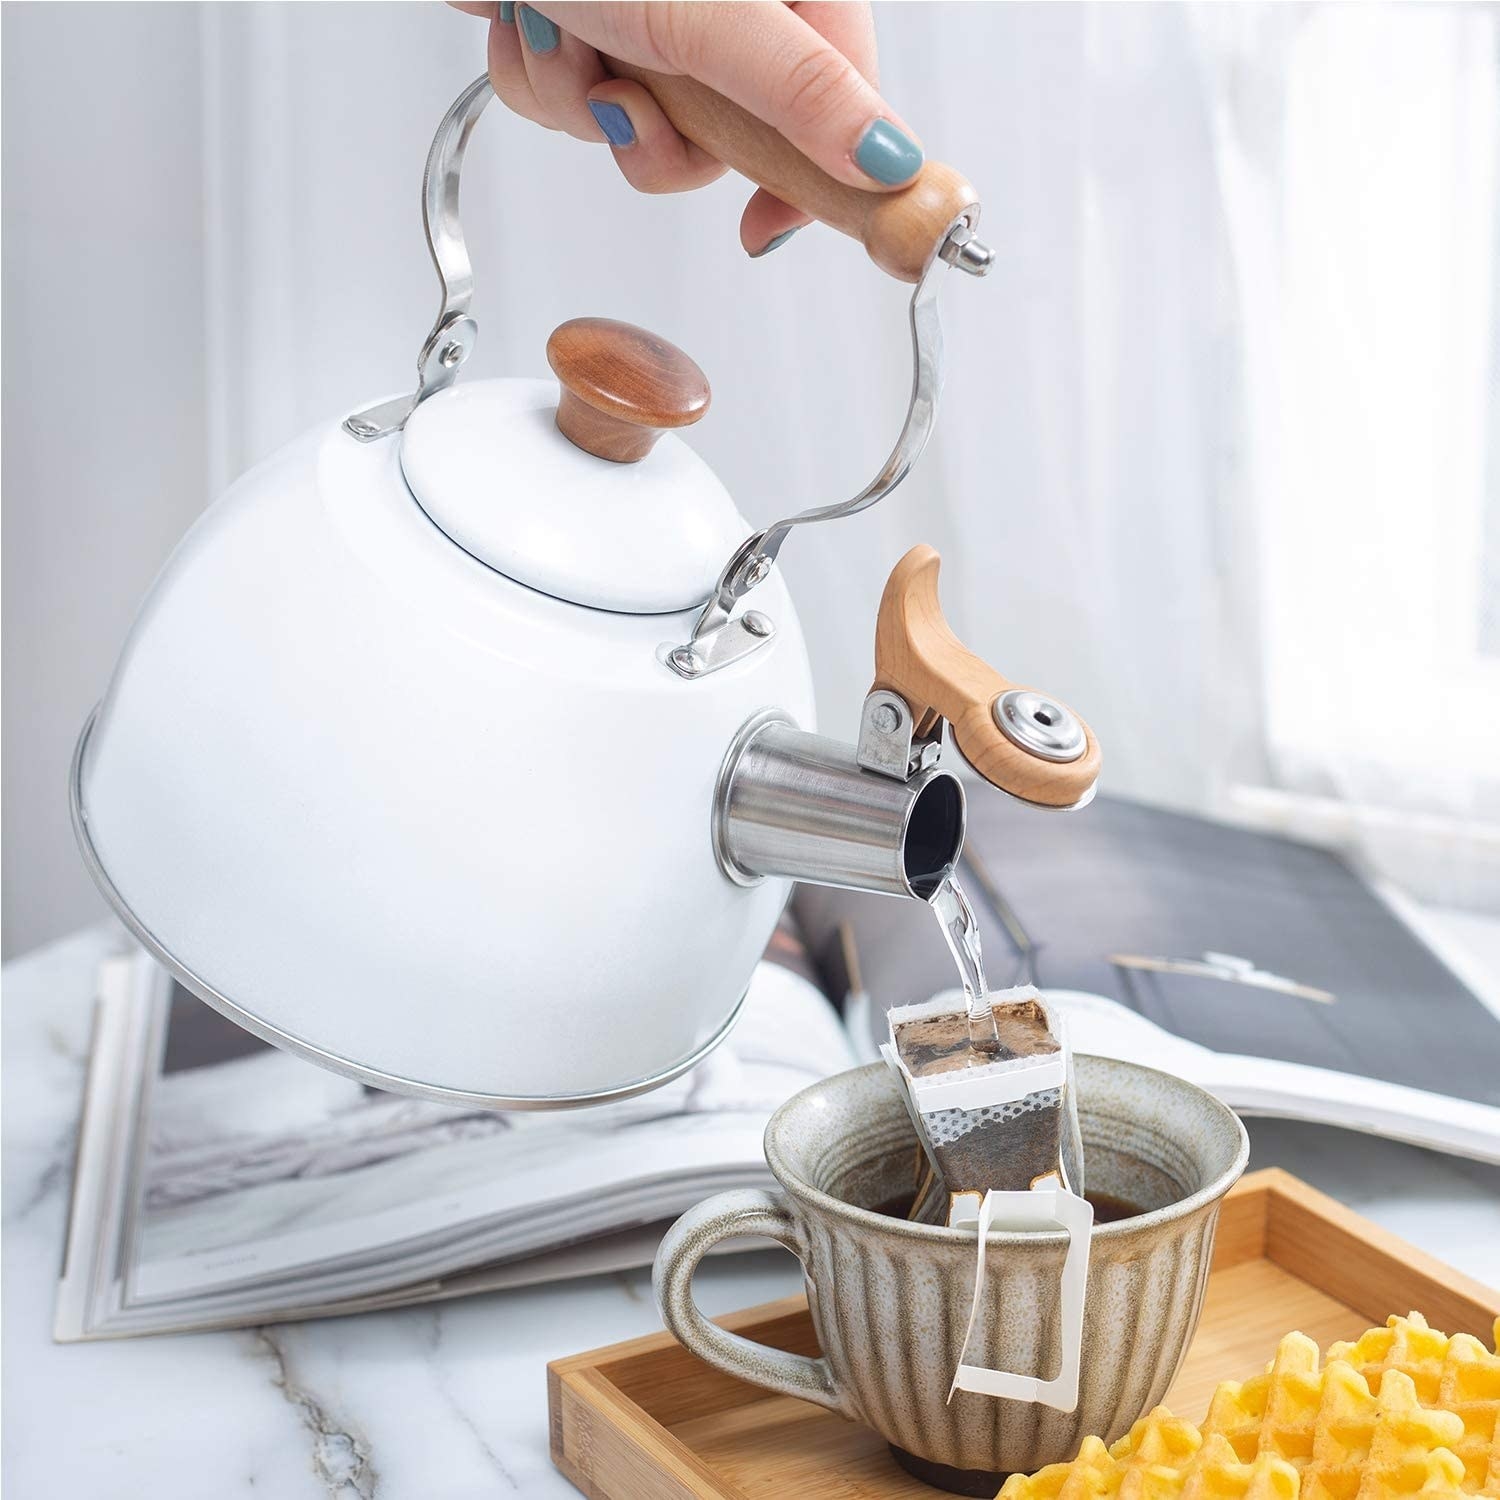 hand holds white, minimal-design tea kettle while pouring tea into cup